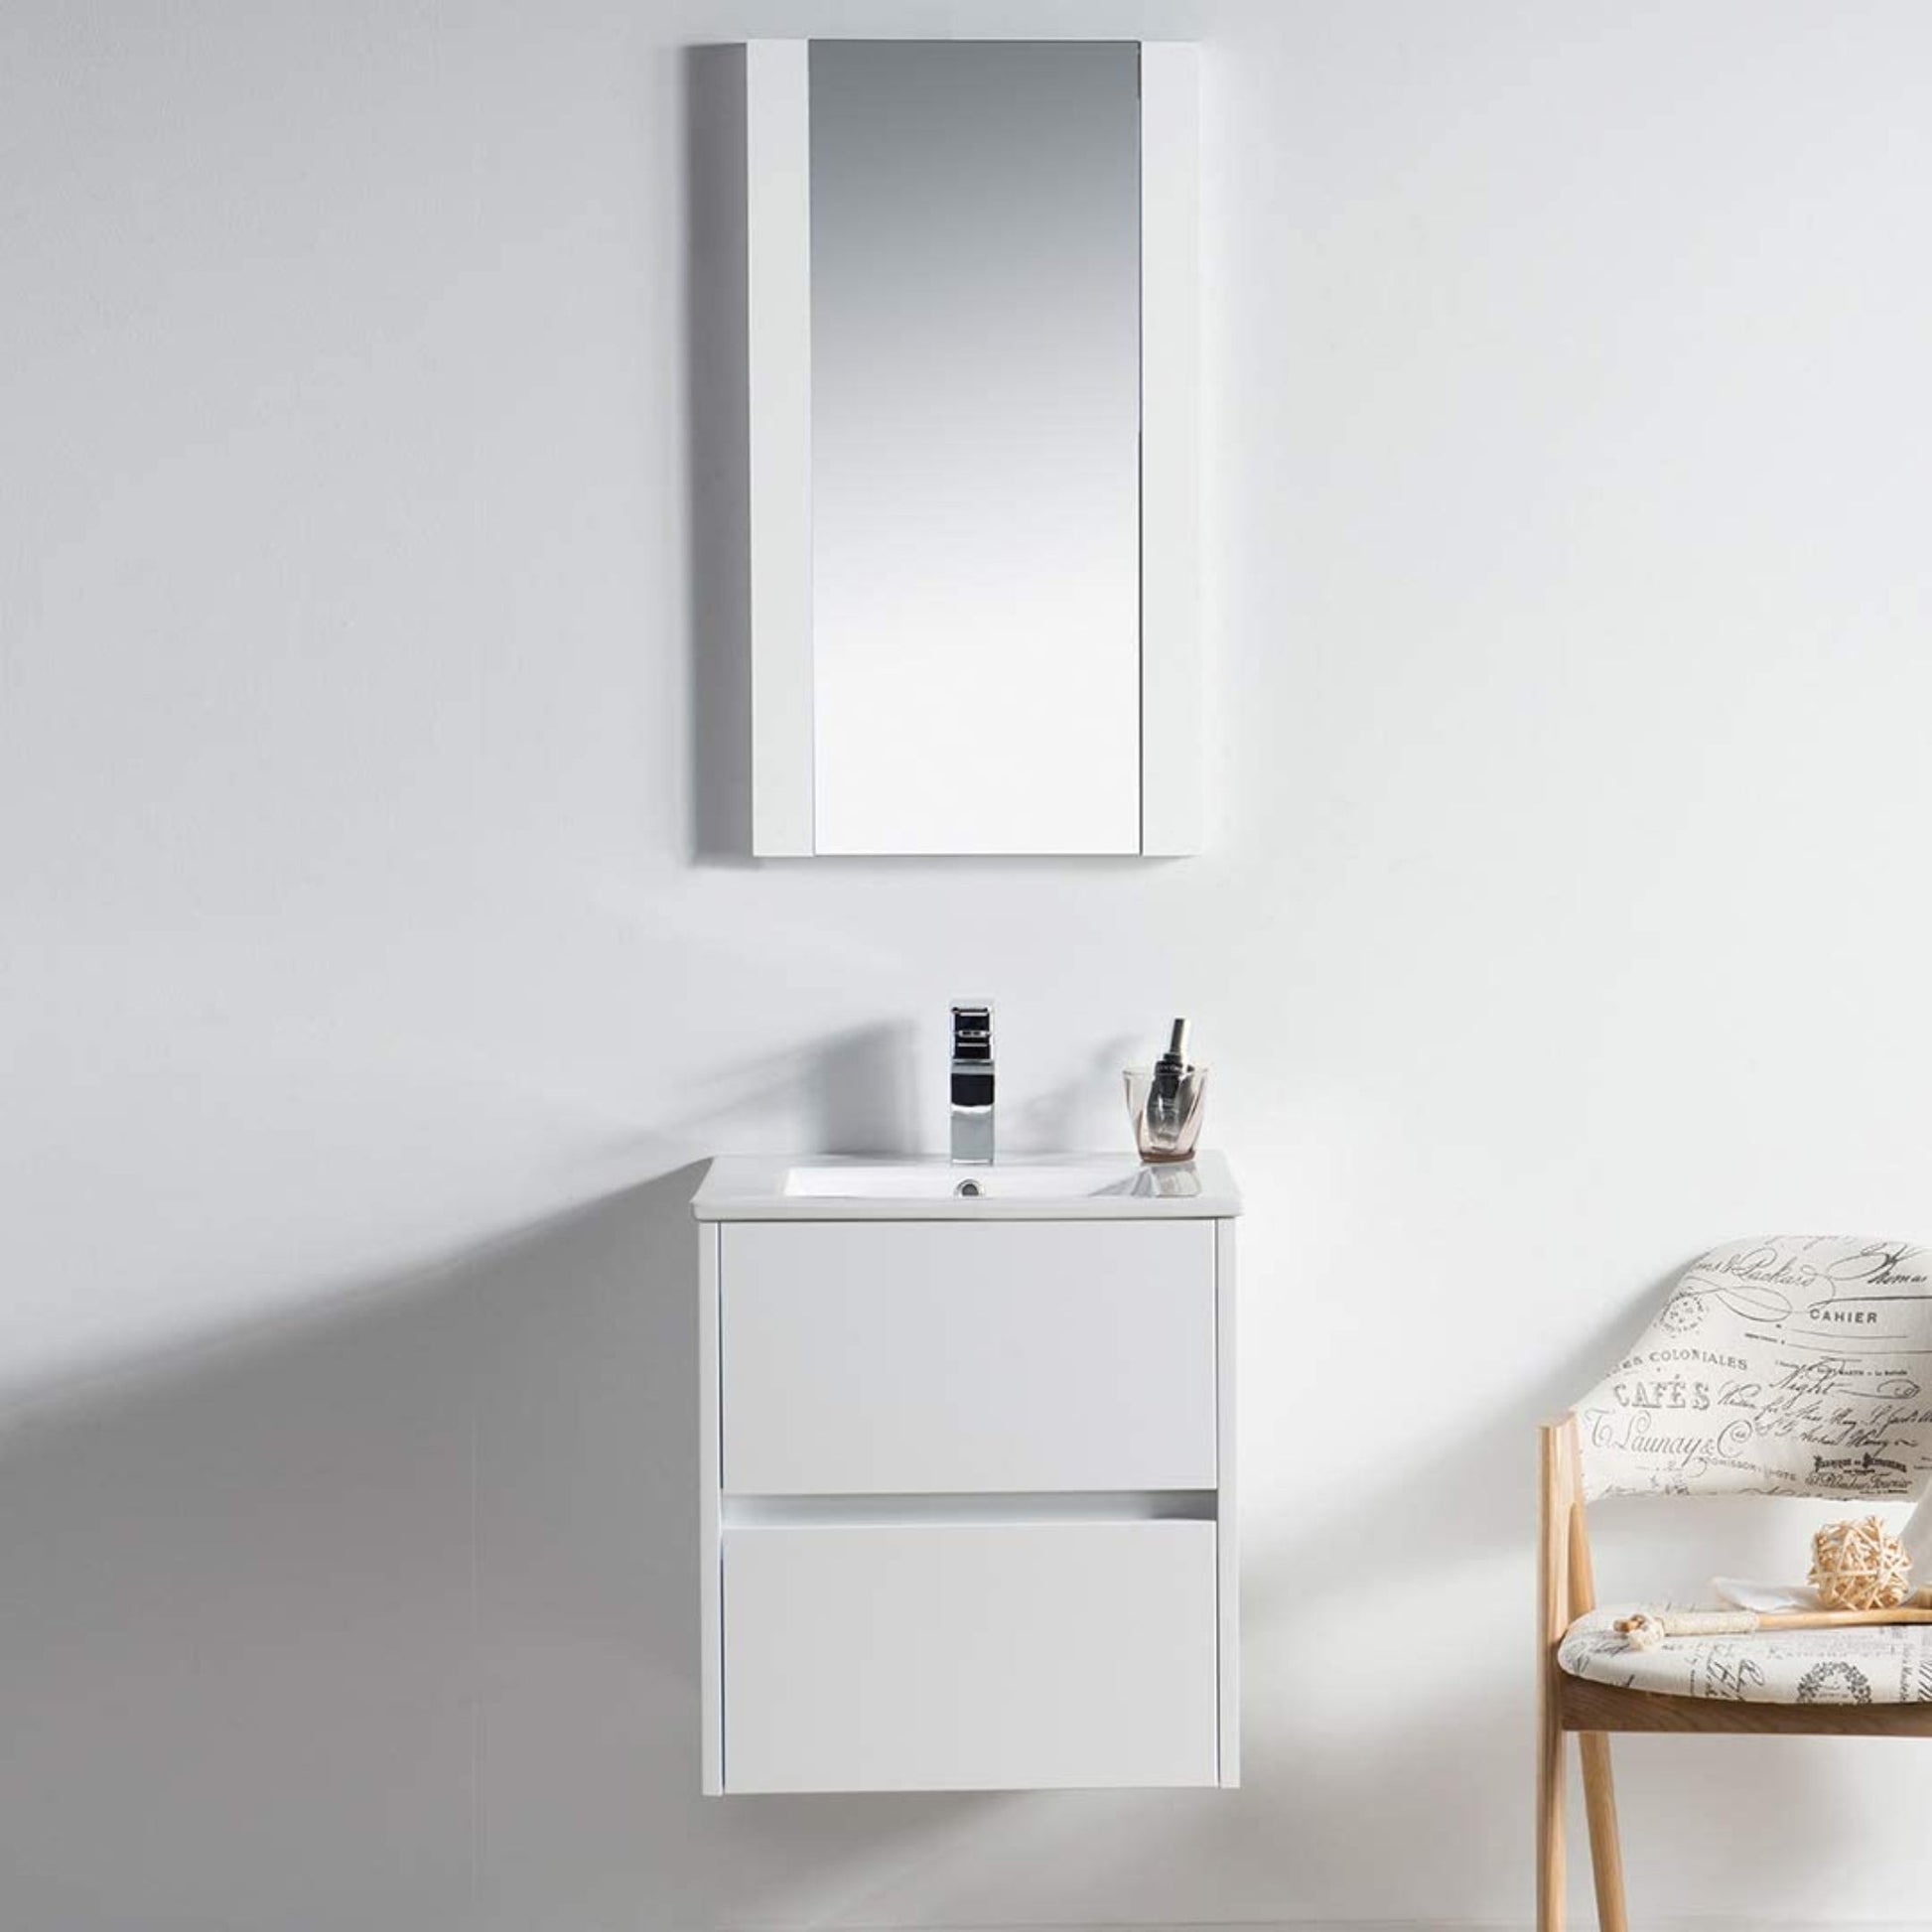 Blossom Valencia 20" 2-Drawer White Wall-Mounted Vanity Set With Ceramic Top, Integrated Single Sink and Mirror